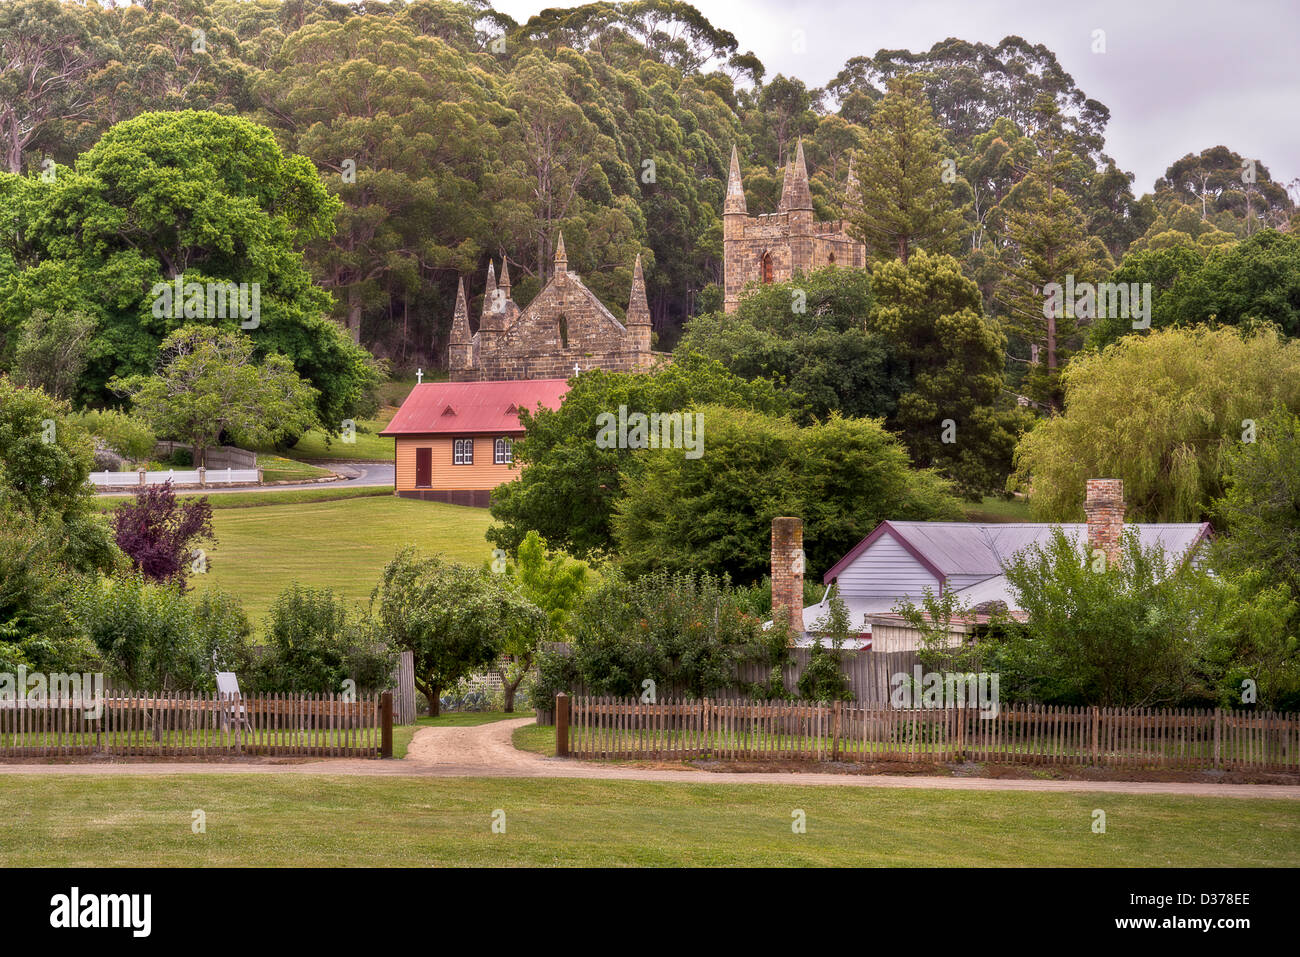 Building ruins at Port Arthur, Tasmania which was once a penal settlement in the colony's convict beginnings. Horizontal Stock Photo